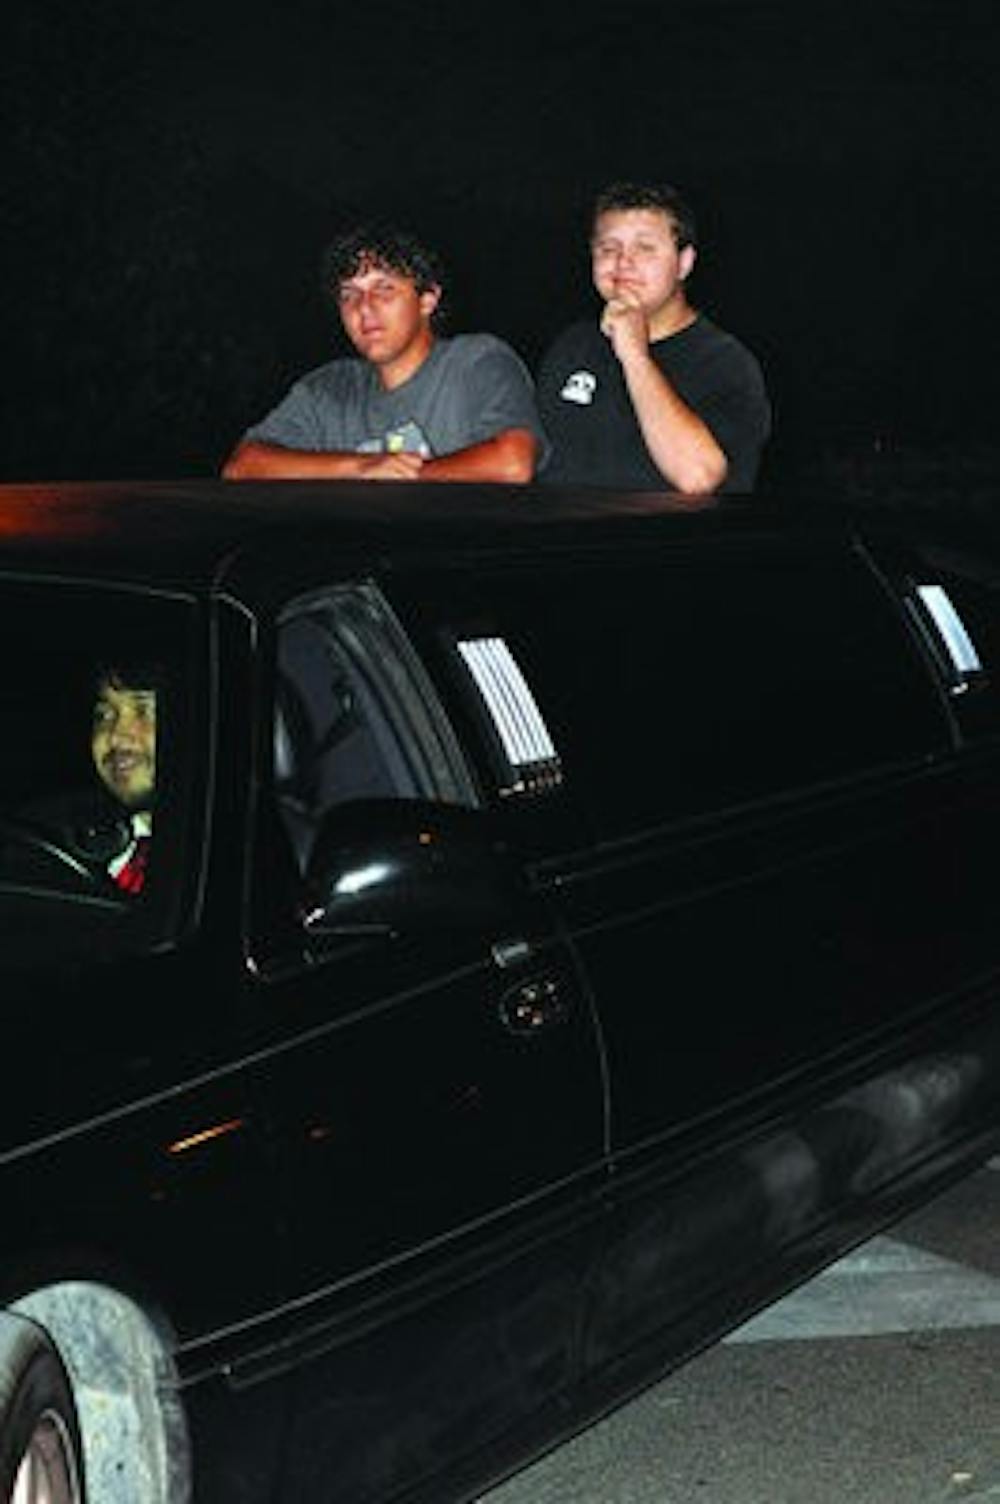 Ben Furman and David Raley ride a limousine from Terrell Hall to the Tiger Zone area of Village Dining. Tiger Dining is sponsoring the rides every Monday in October. (PHOTO ILLUSTRATION)